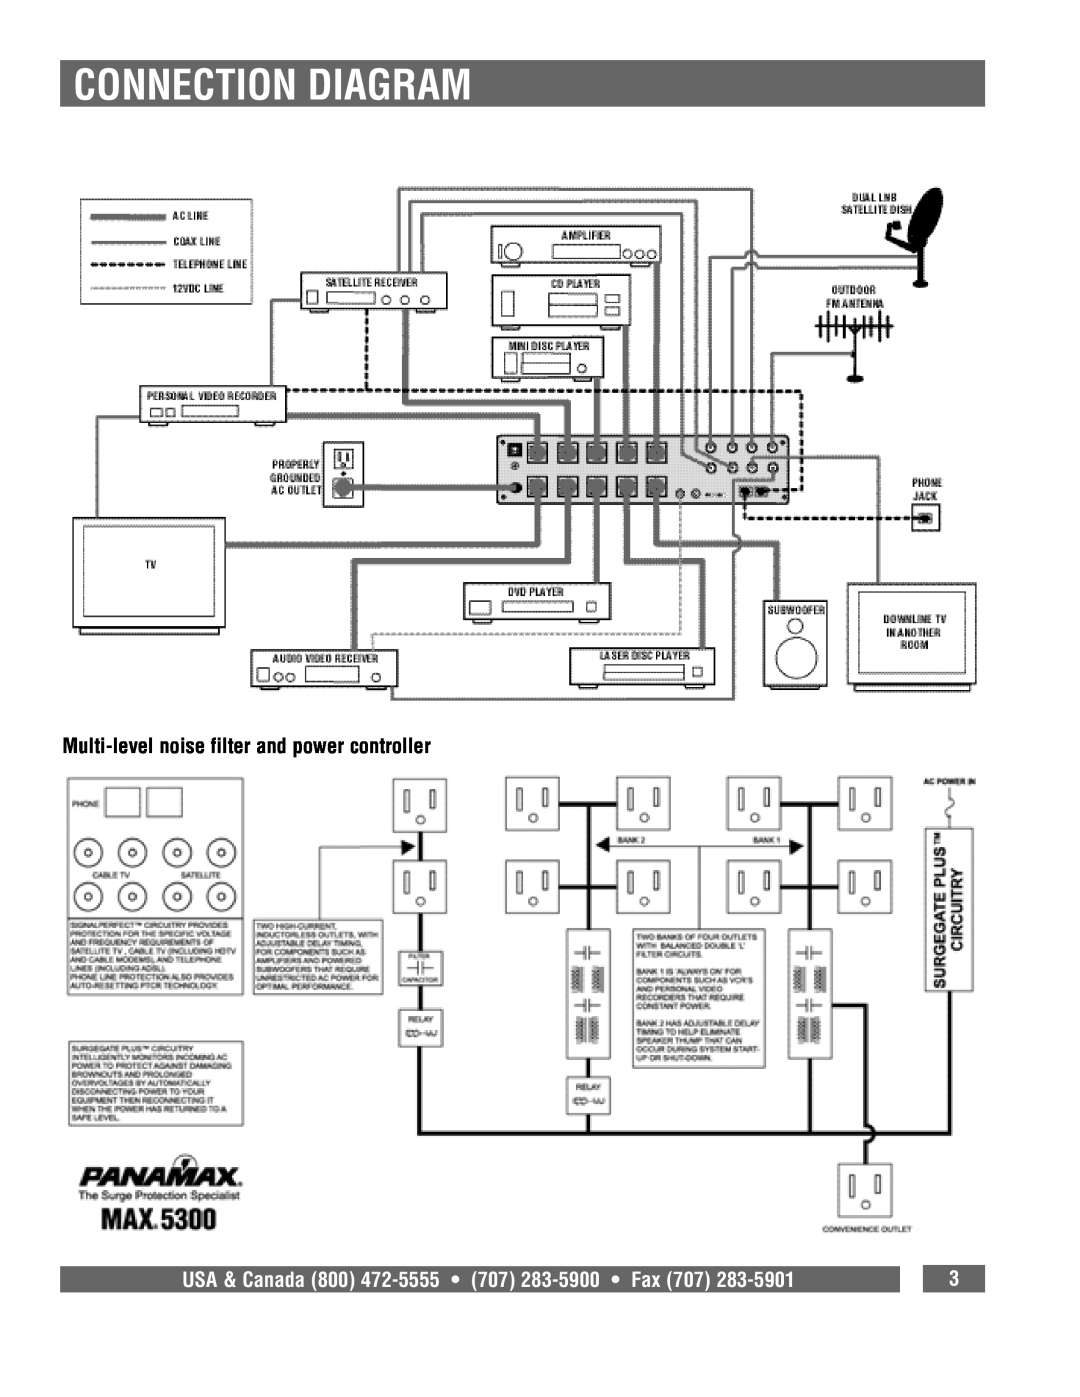 Panamax 5300 Connection Diagram, Multi-levelnoise filter and power controller, USA & Canada 800 472-5555 707 283-5900 Fax 